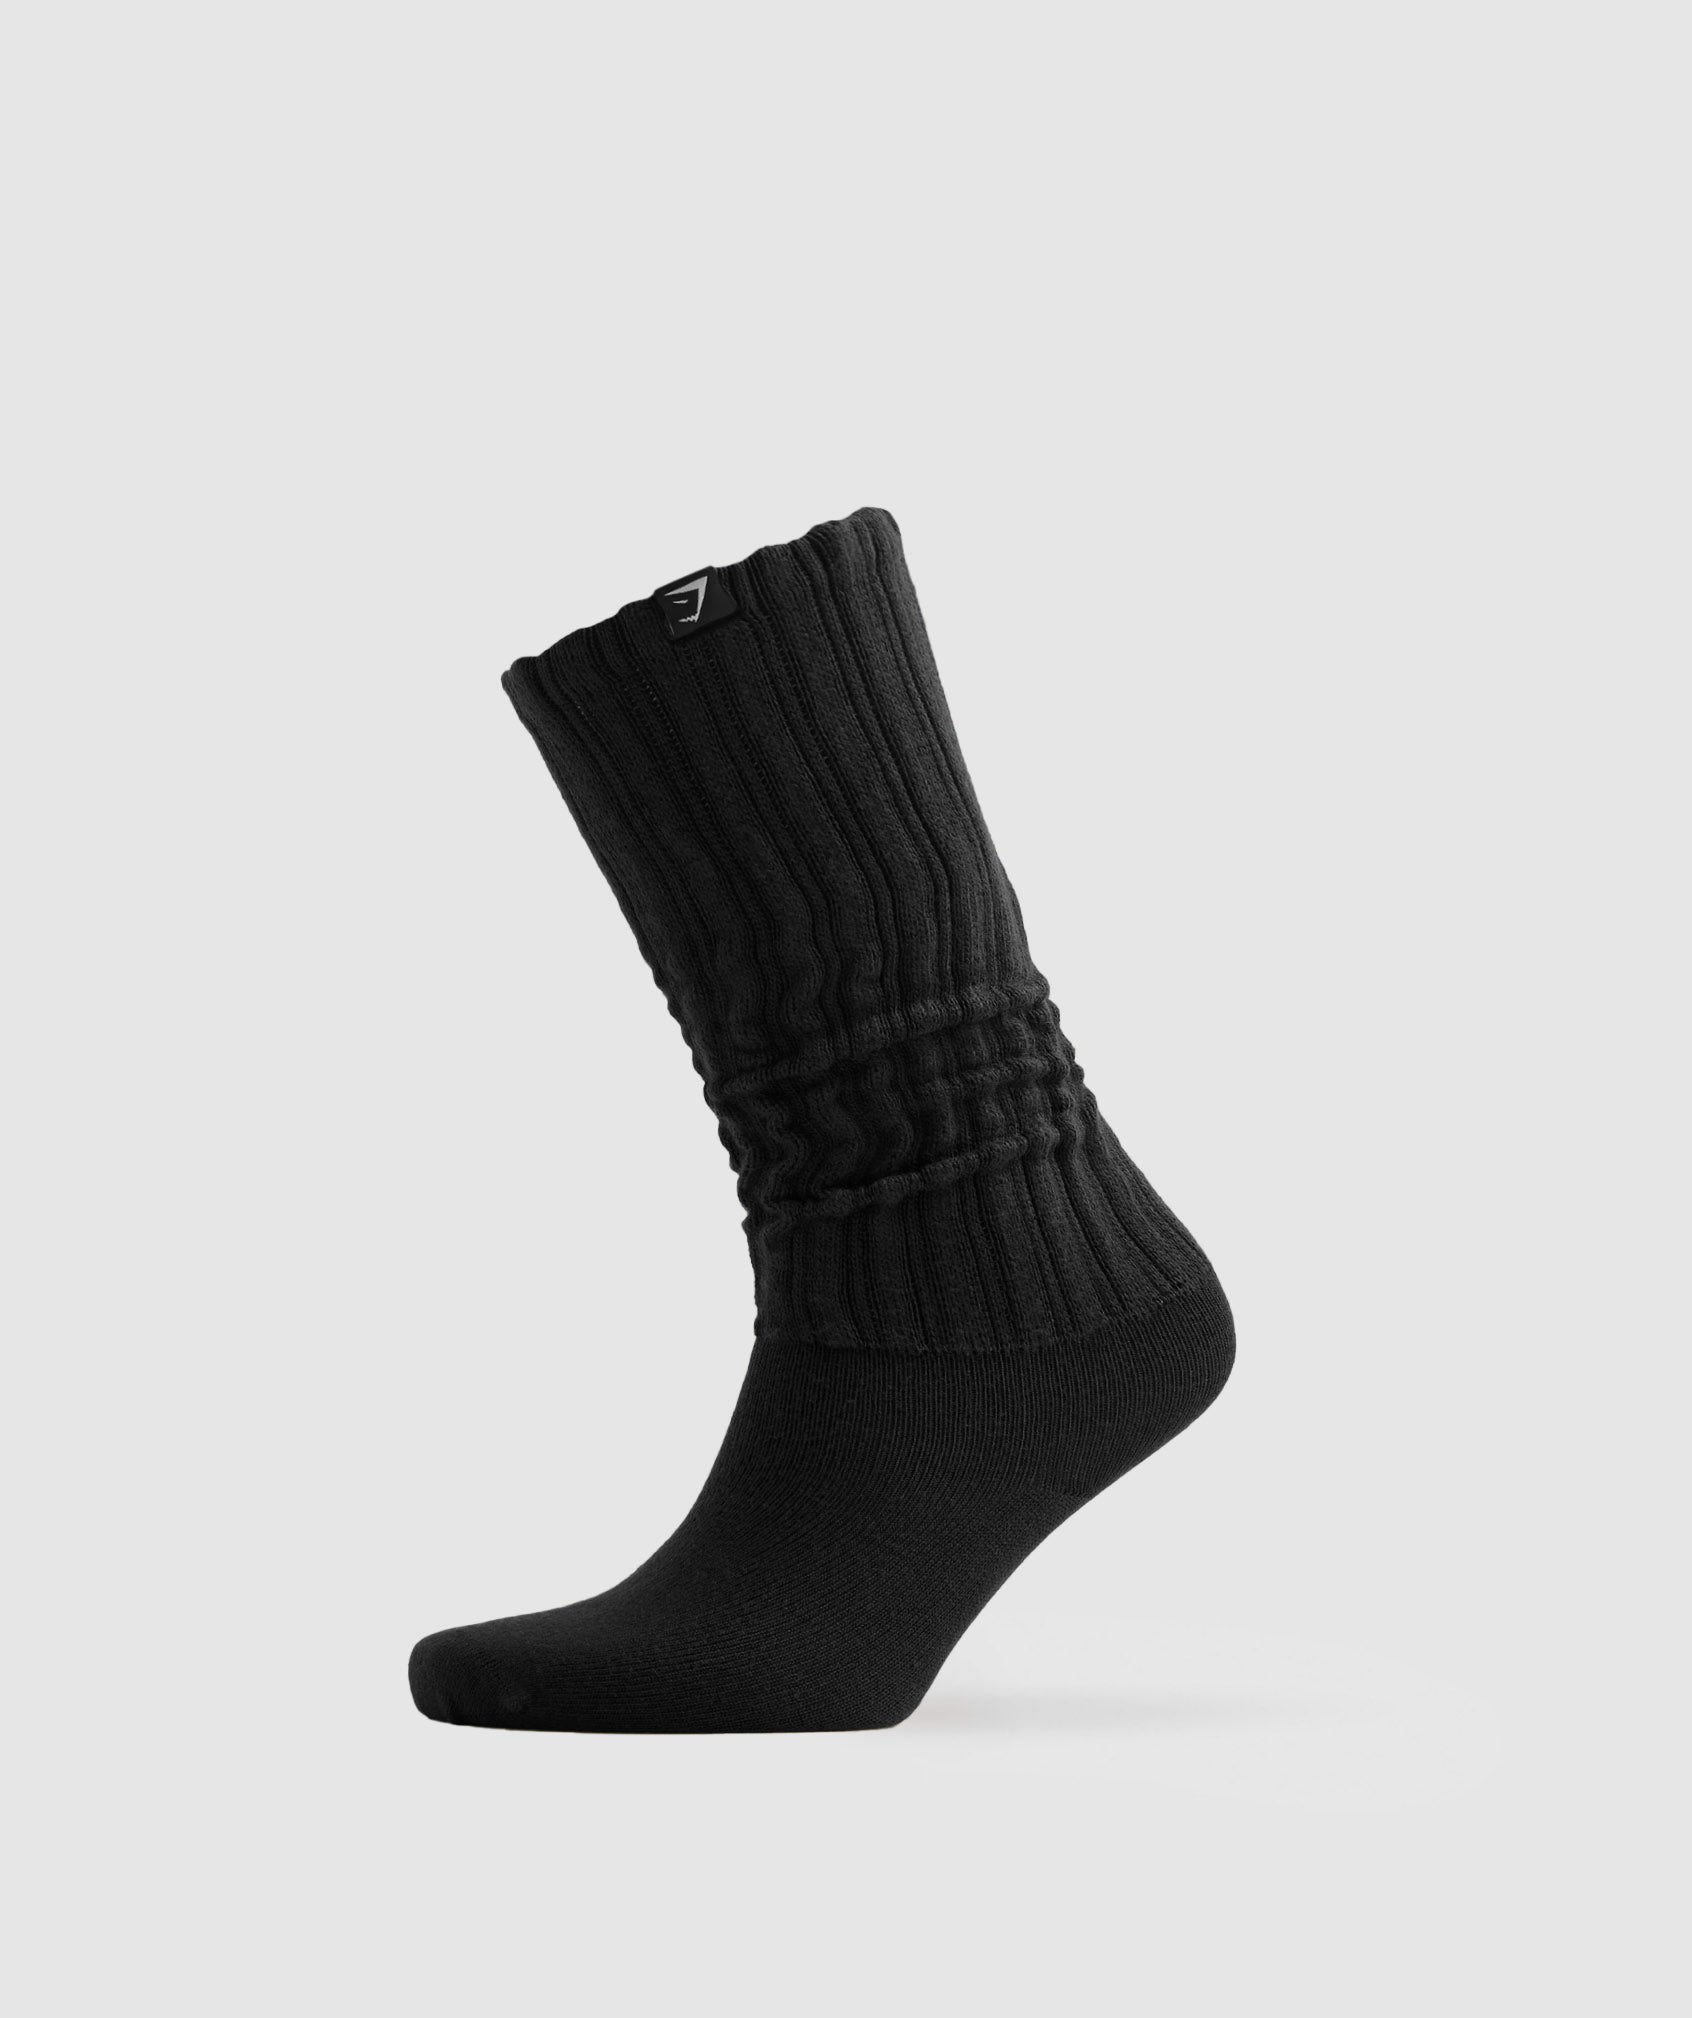 Comfy Rest Day Socks in Black - view 1